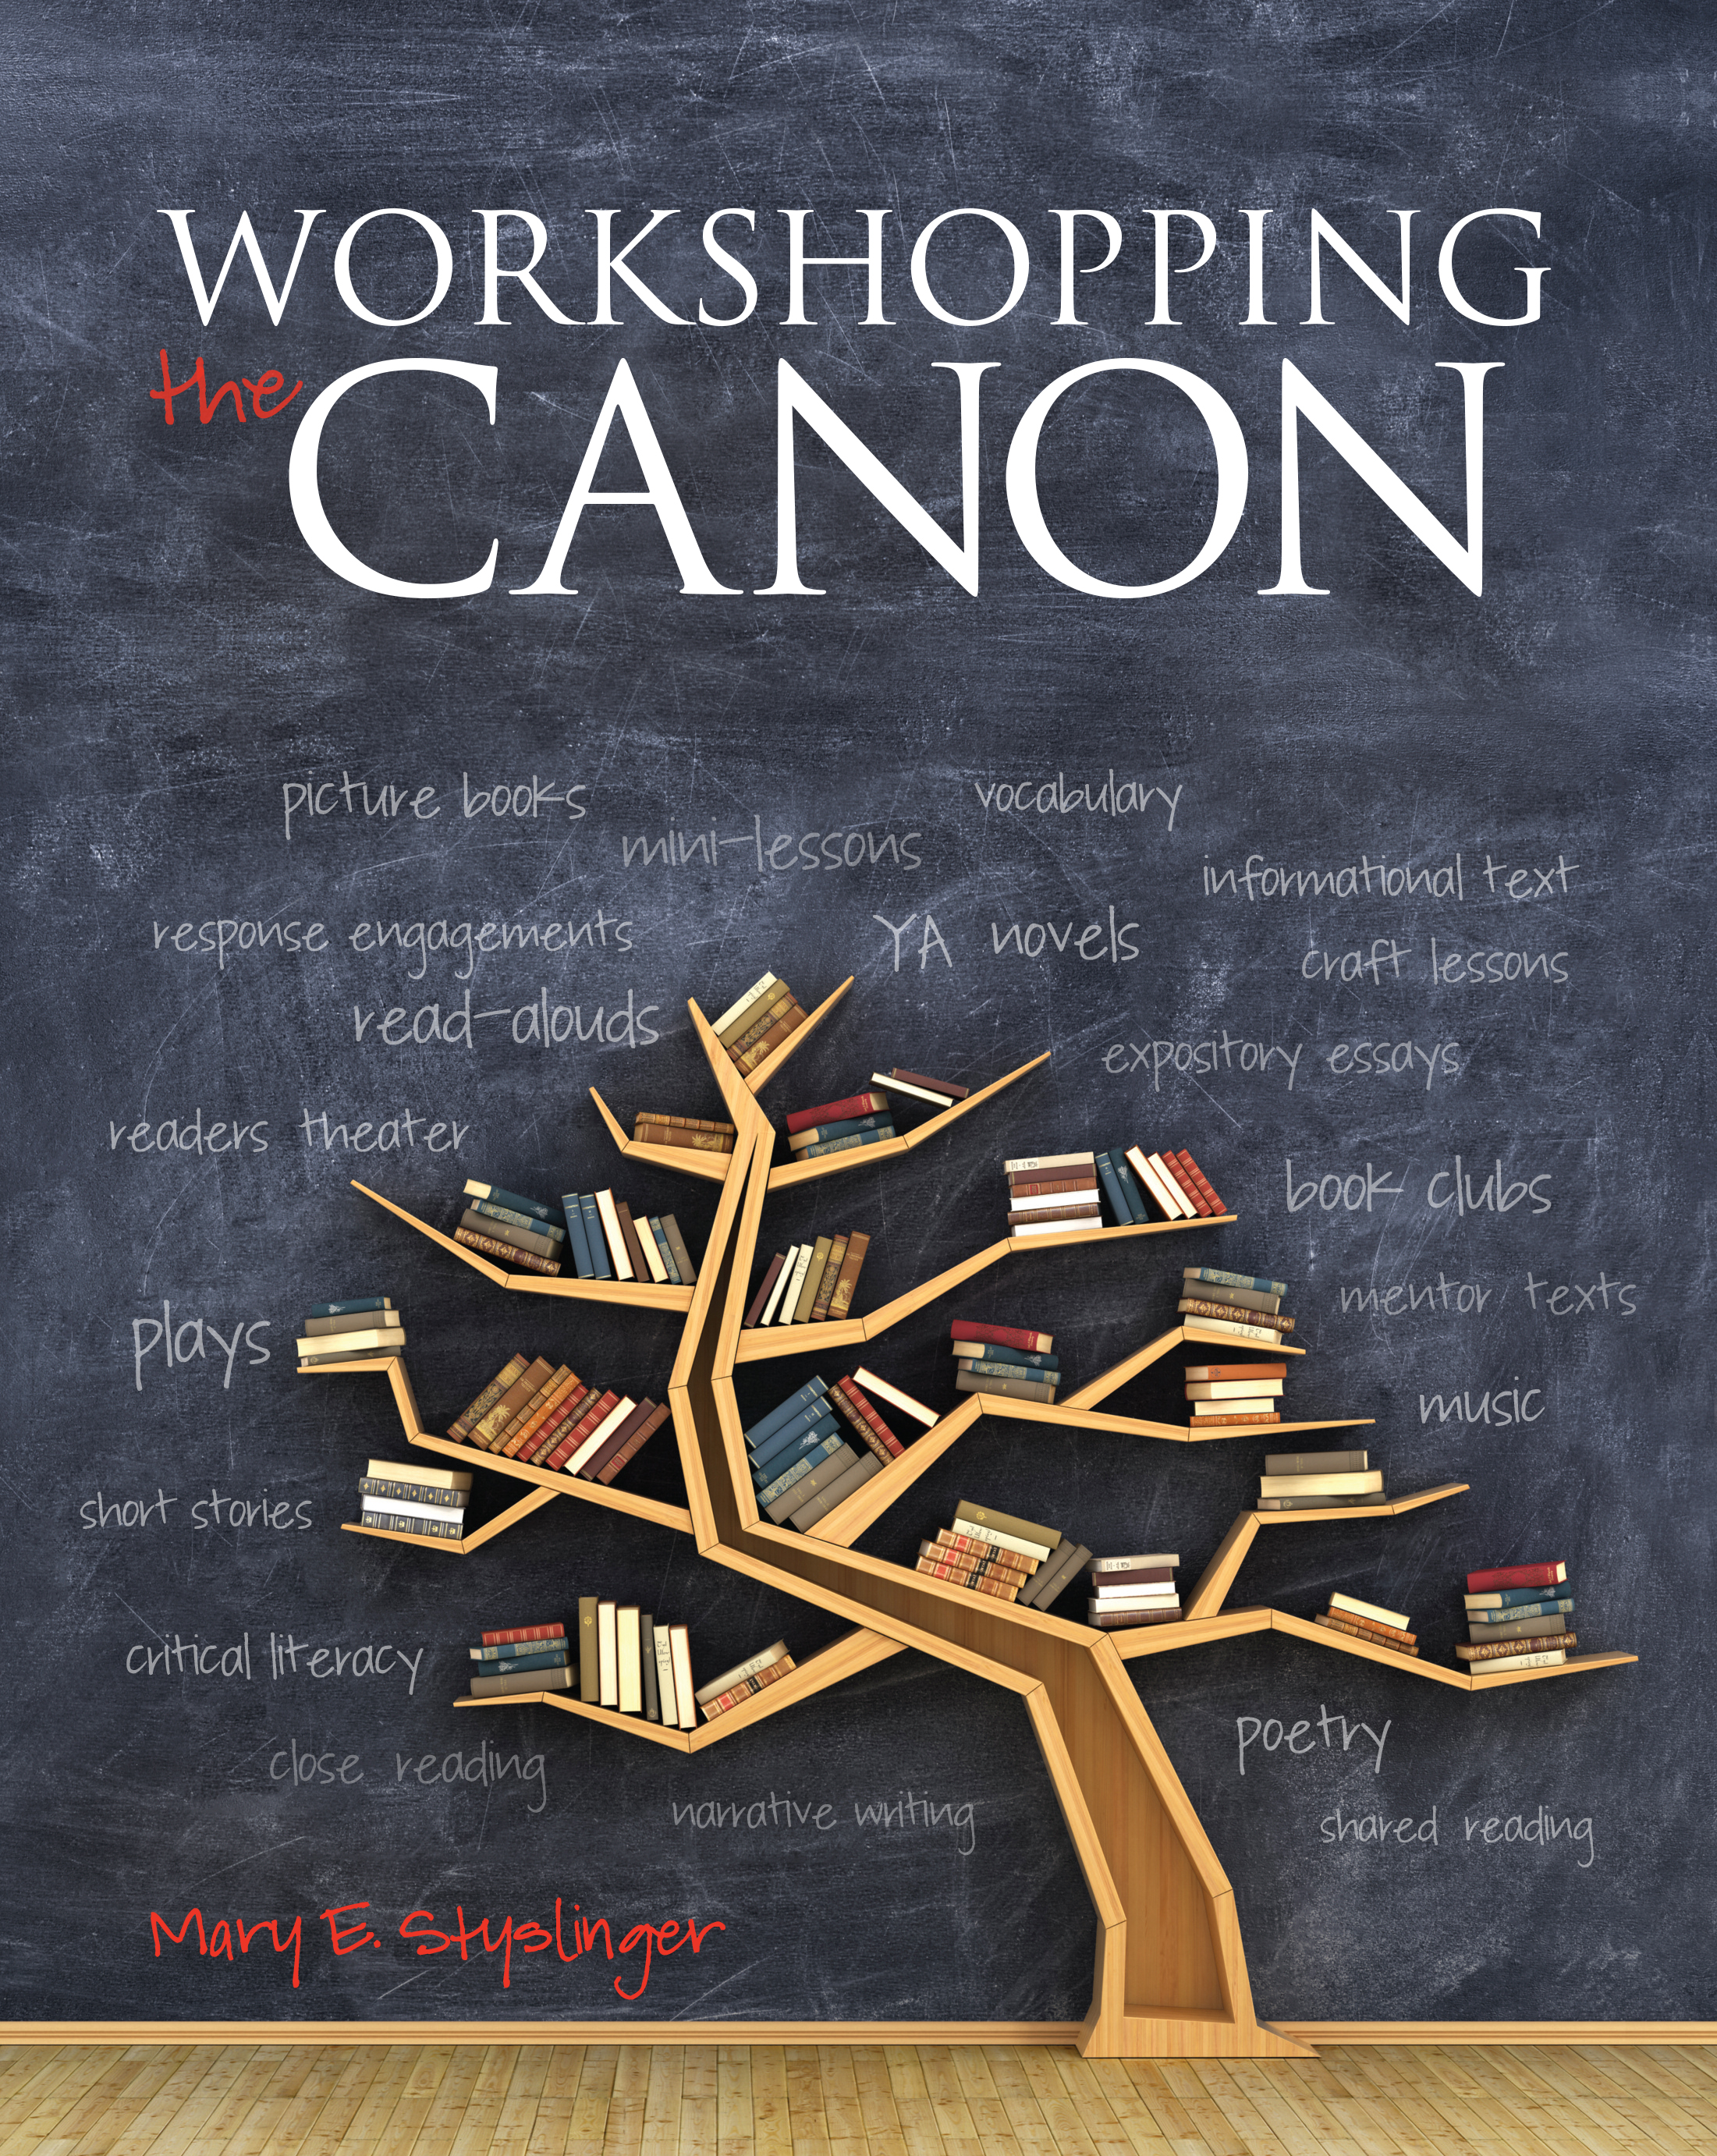 image of Workshopping the Canon